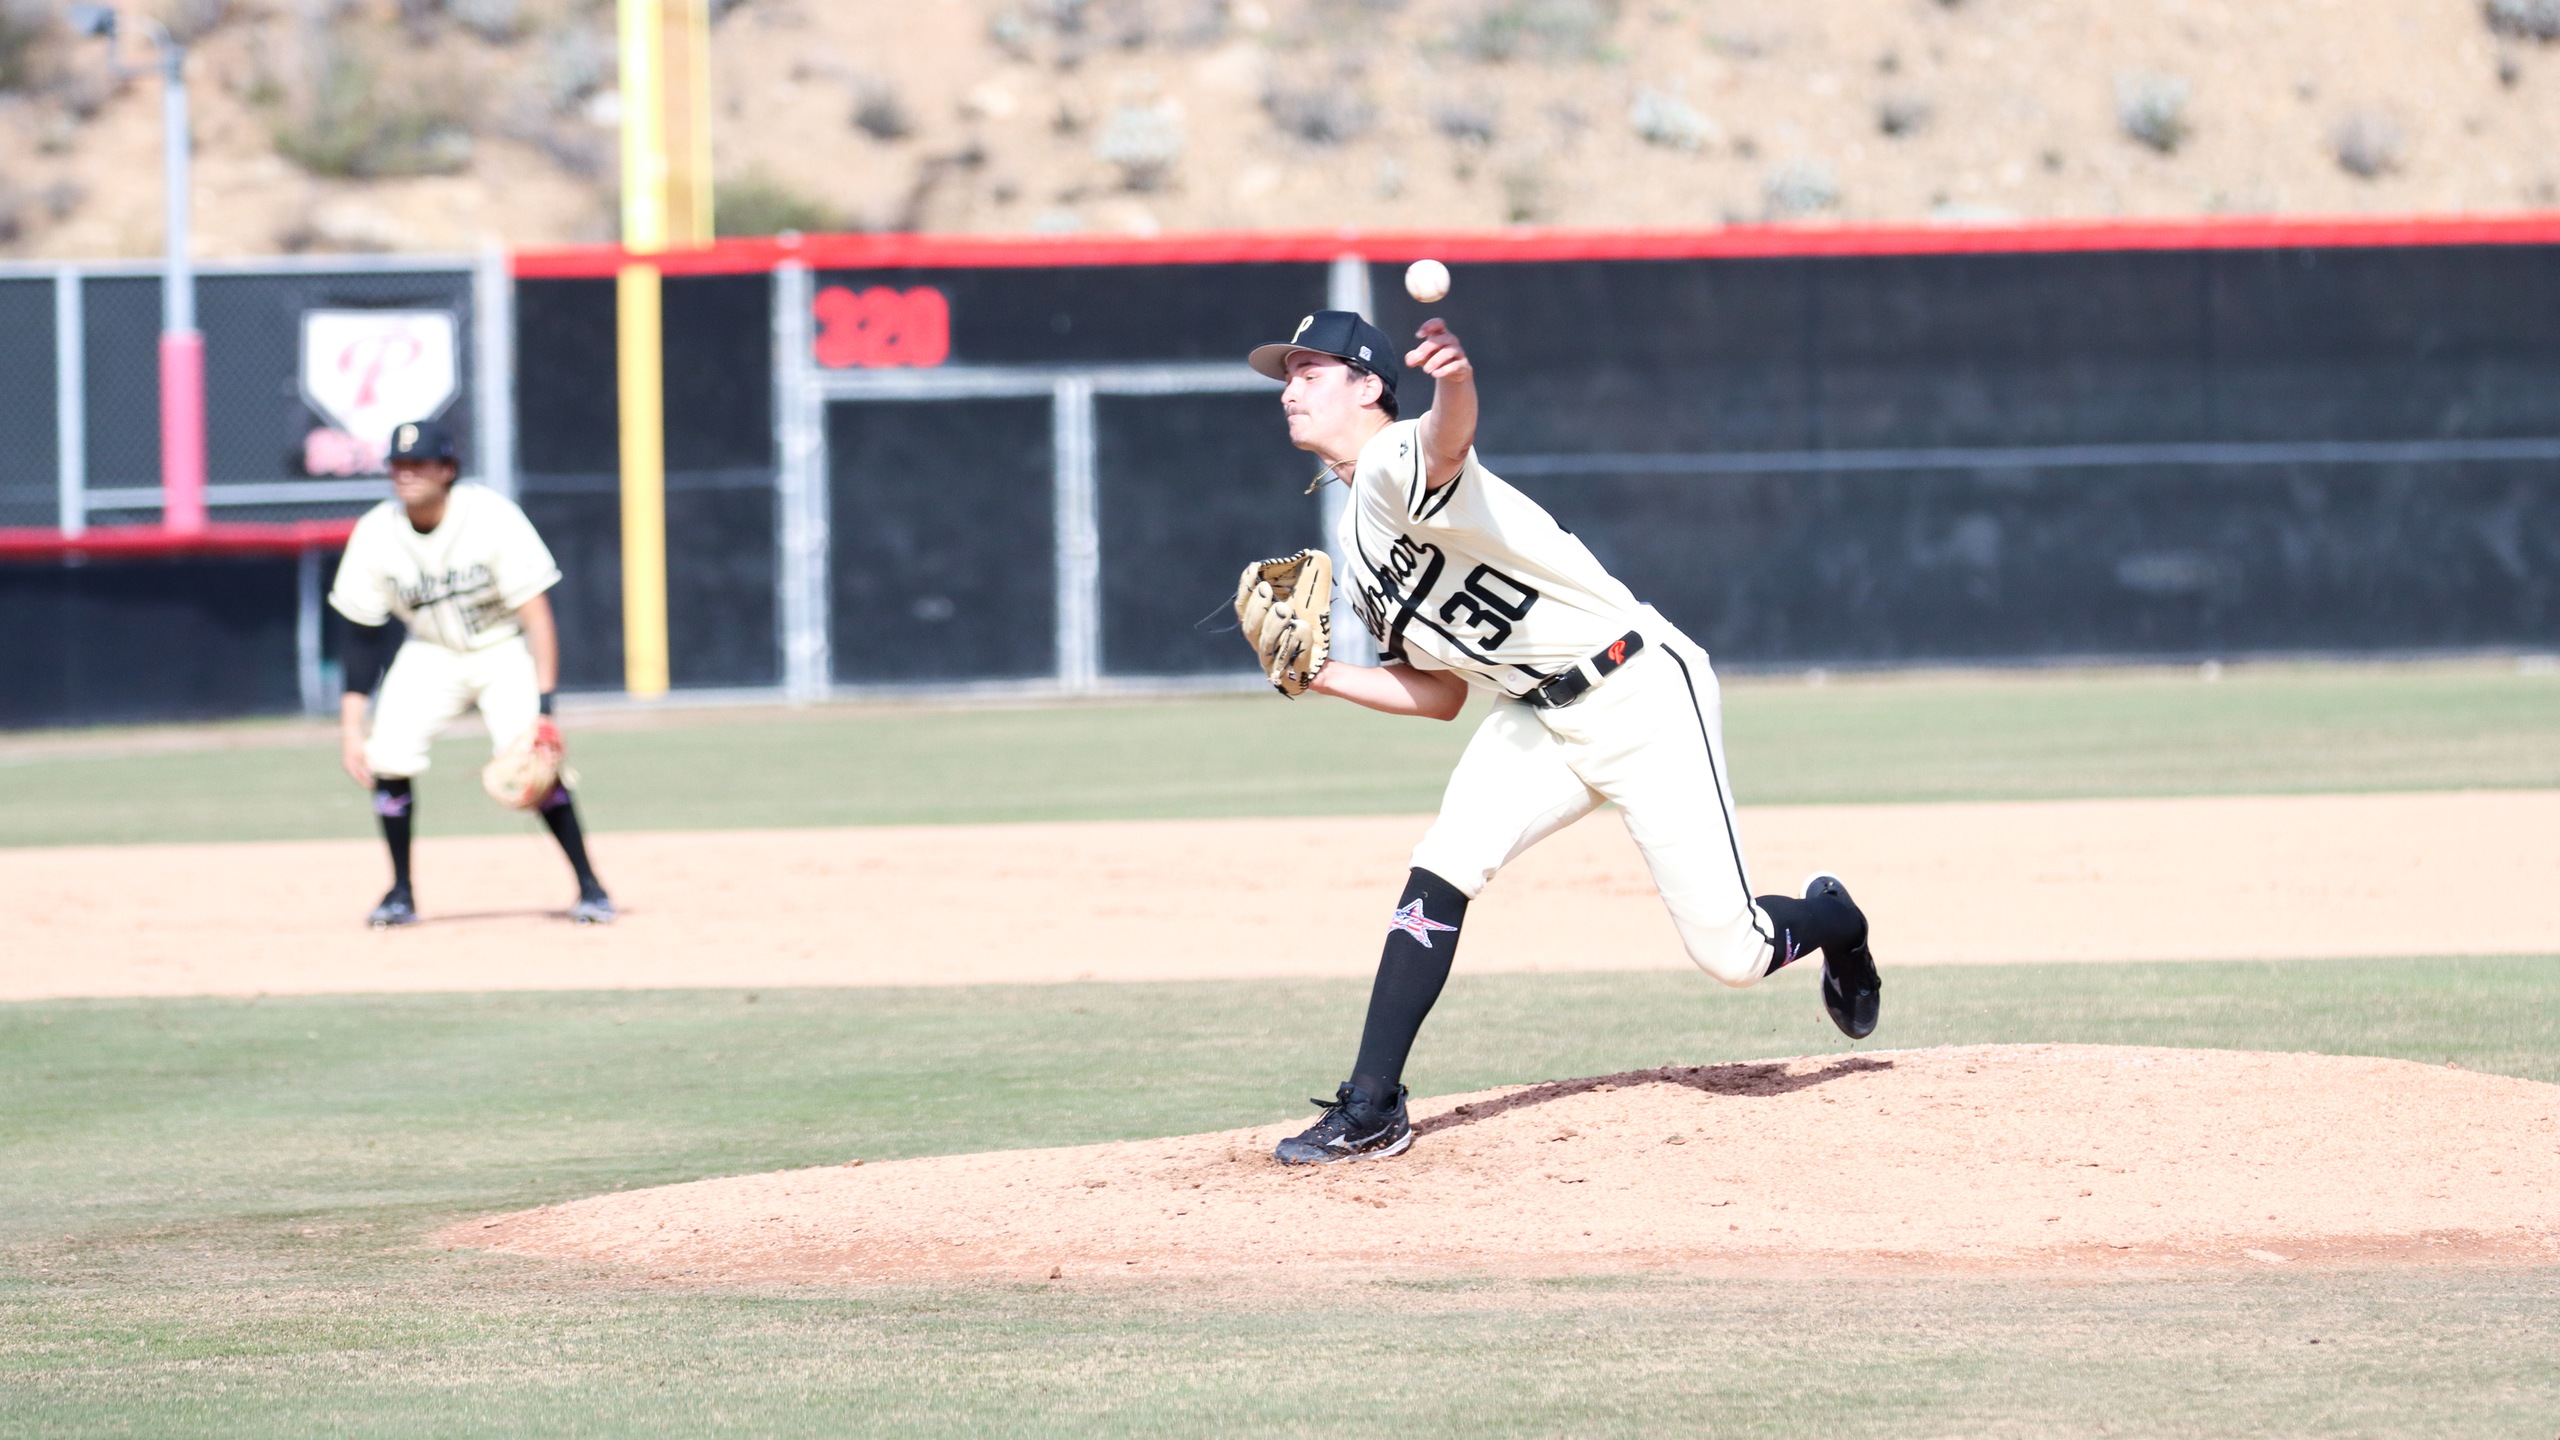 Ryan Herrod recorded six strikeouts on Saturday. Photo by Cara Heise.